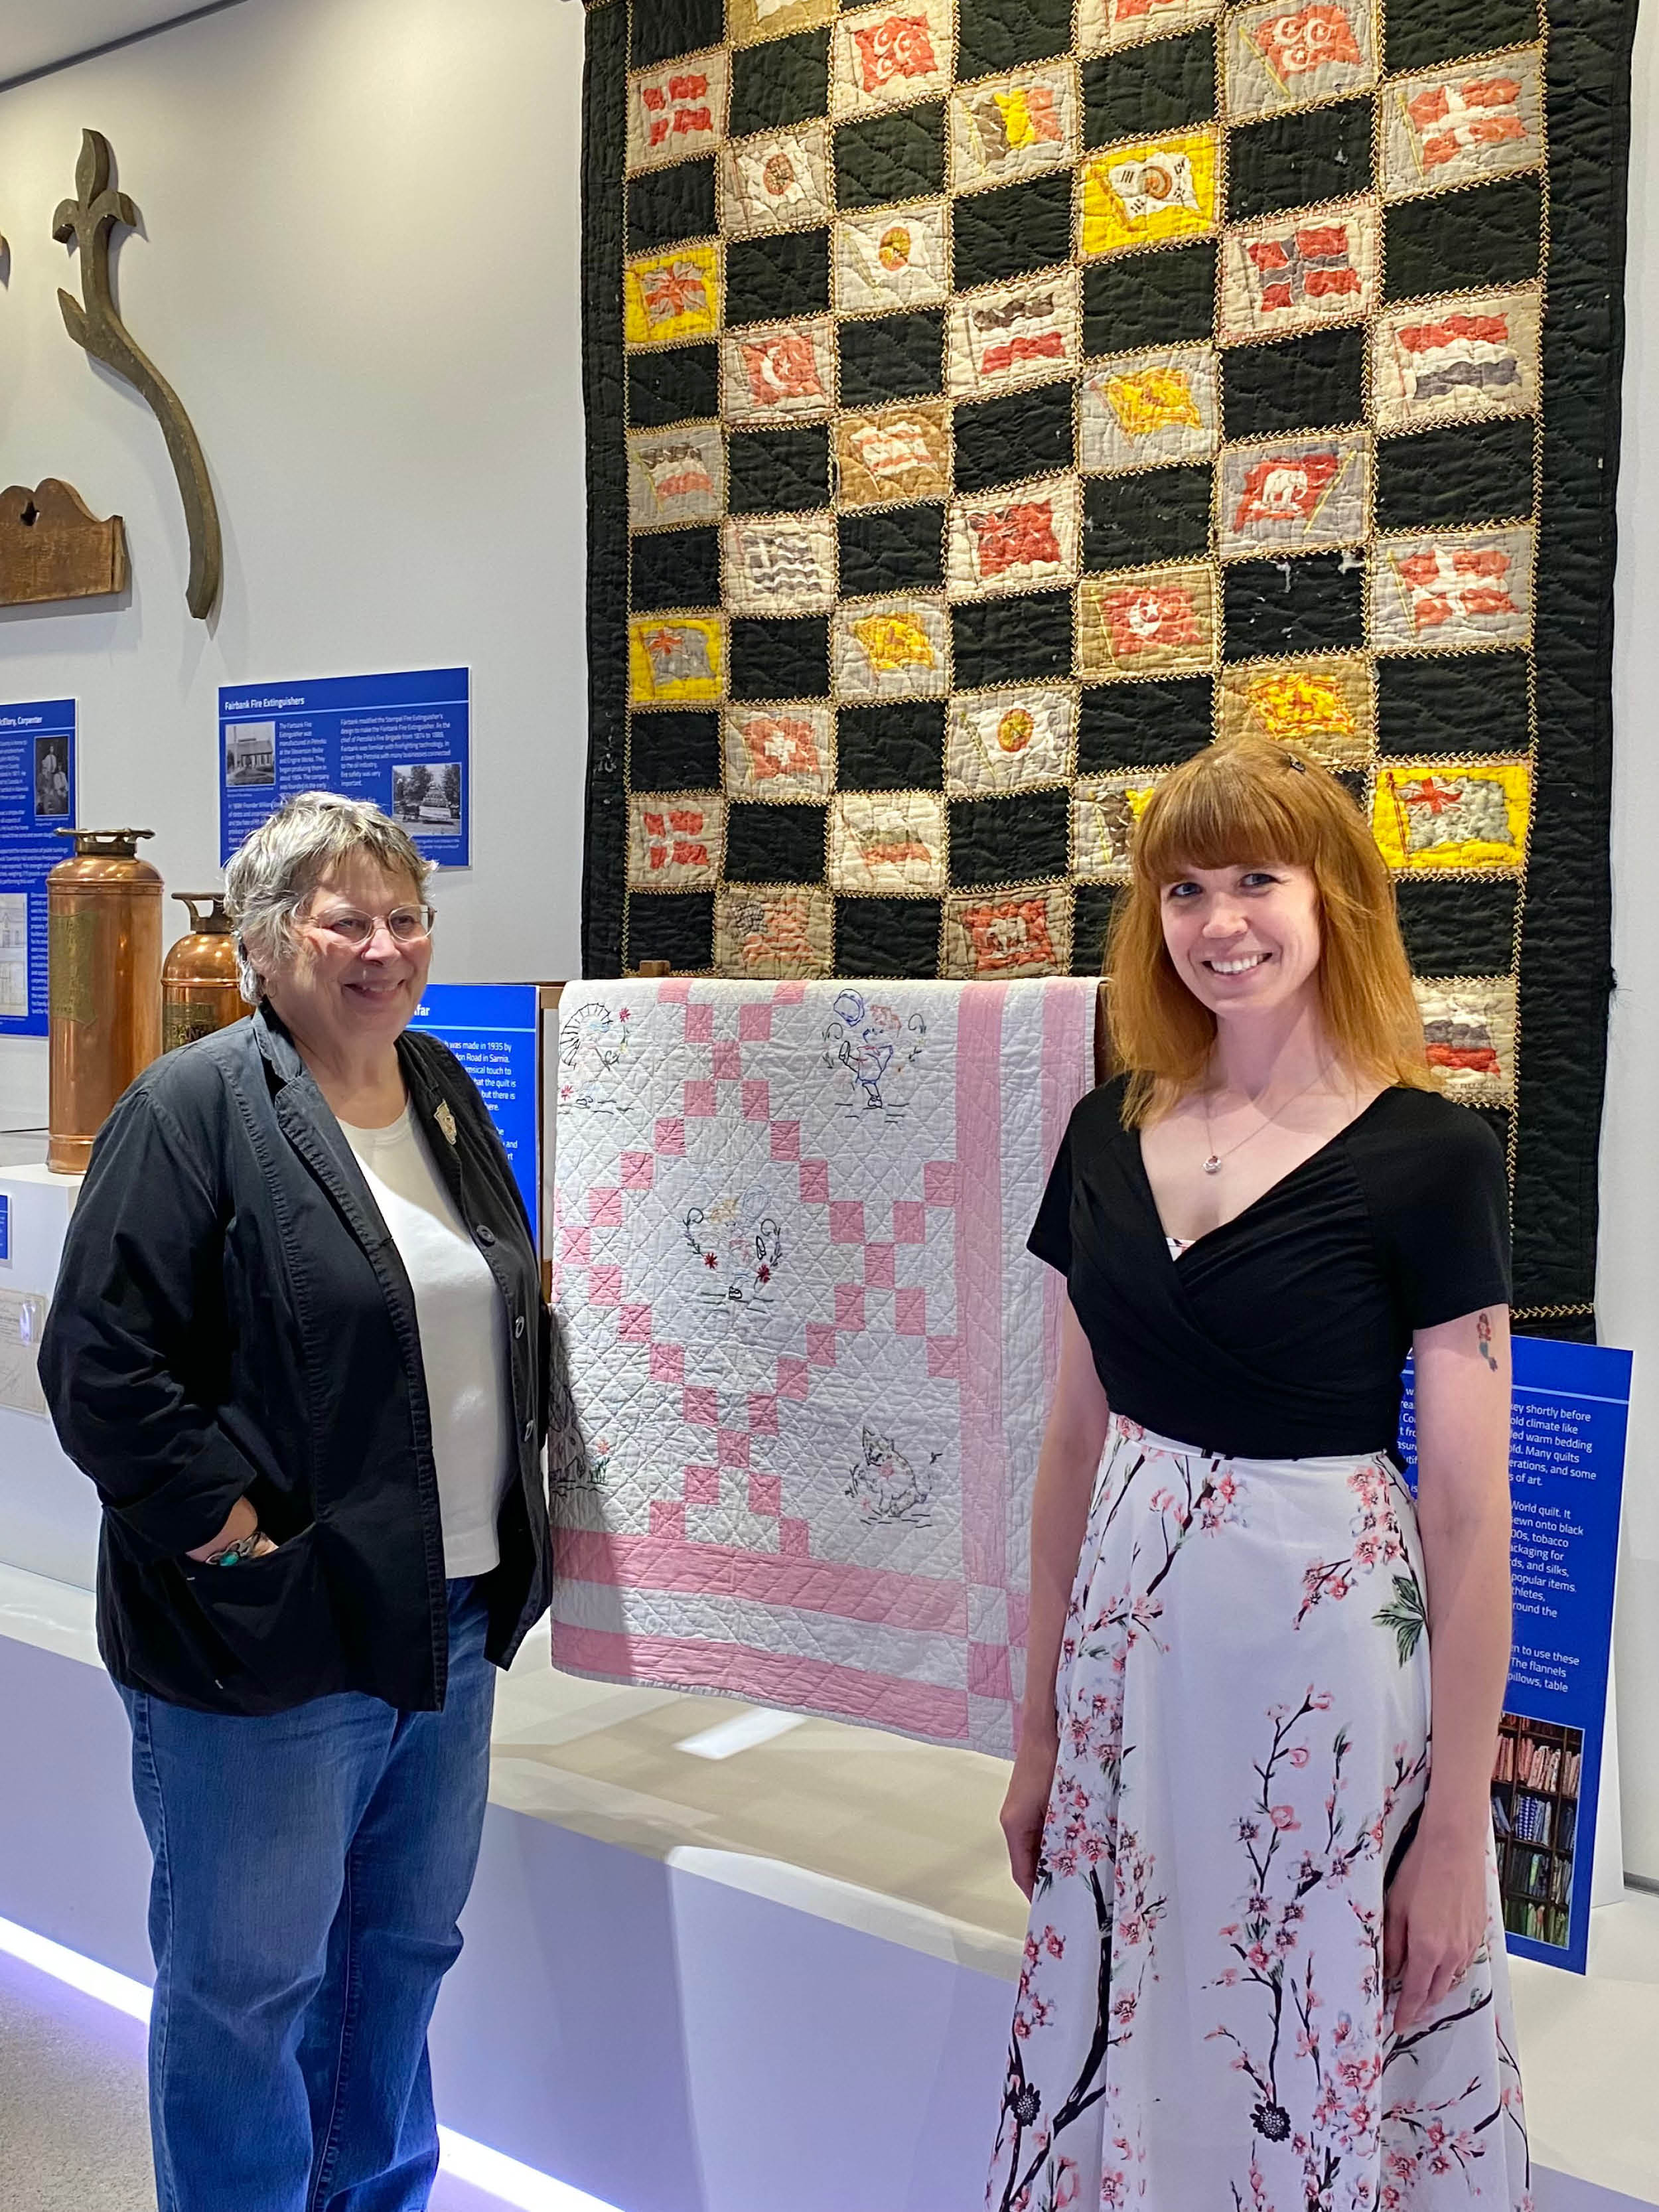 Susan and Dana in front of a quilt on display at the museum